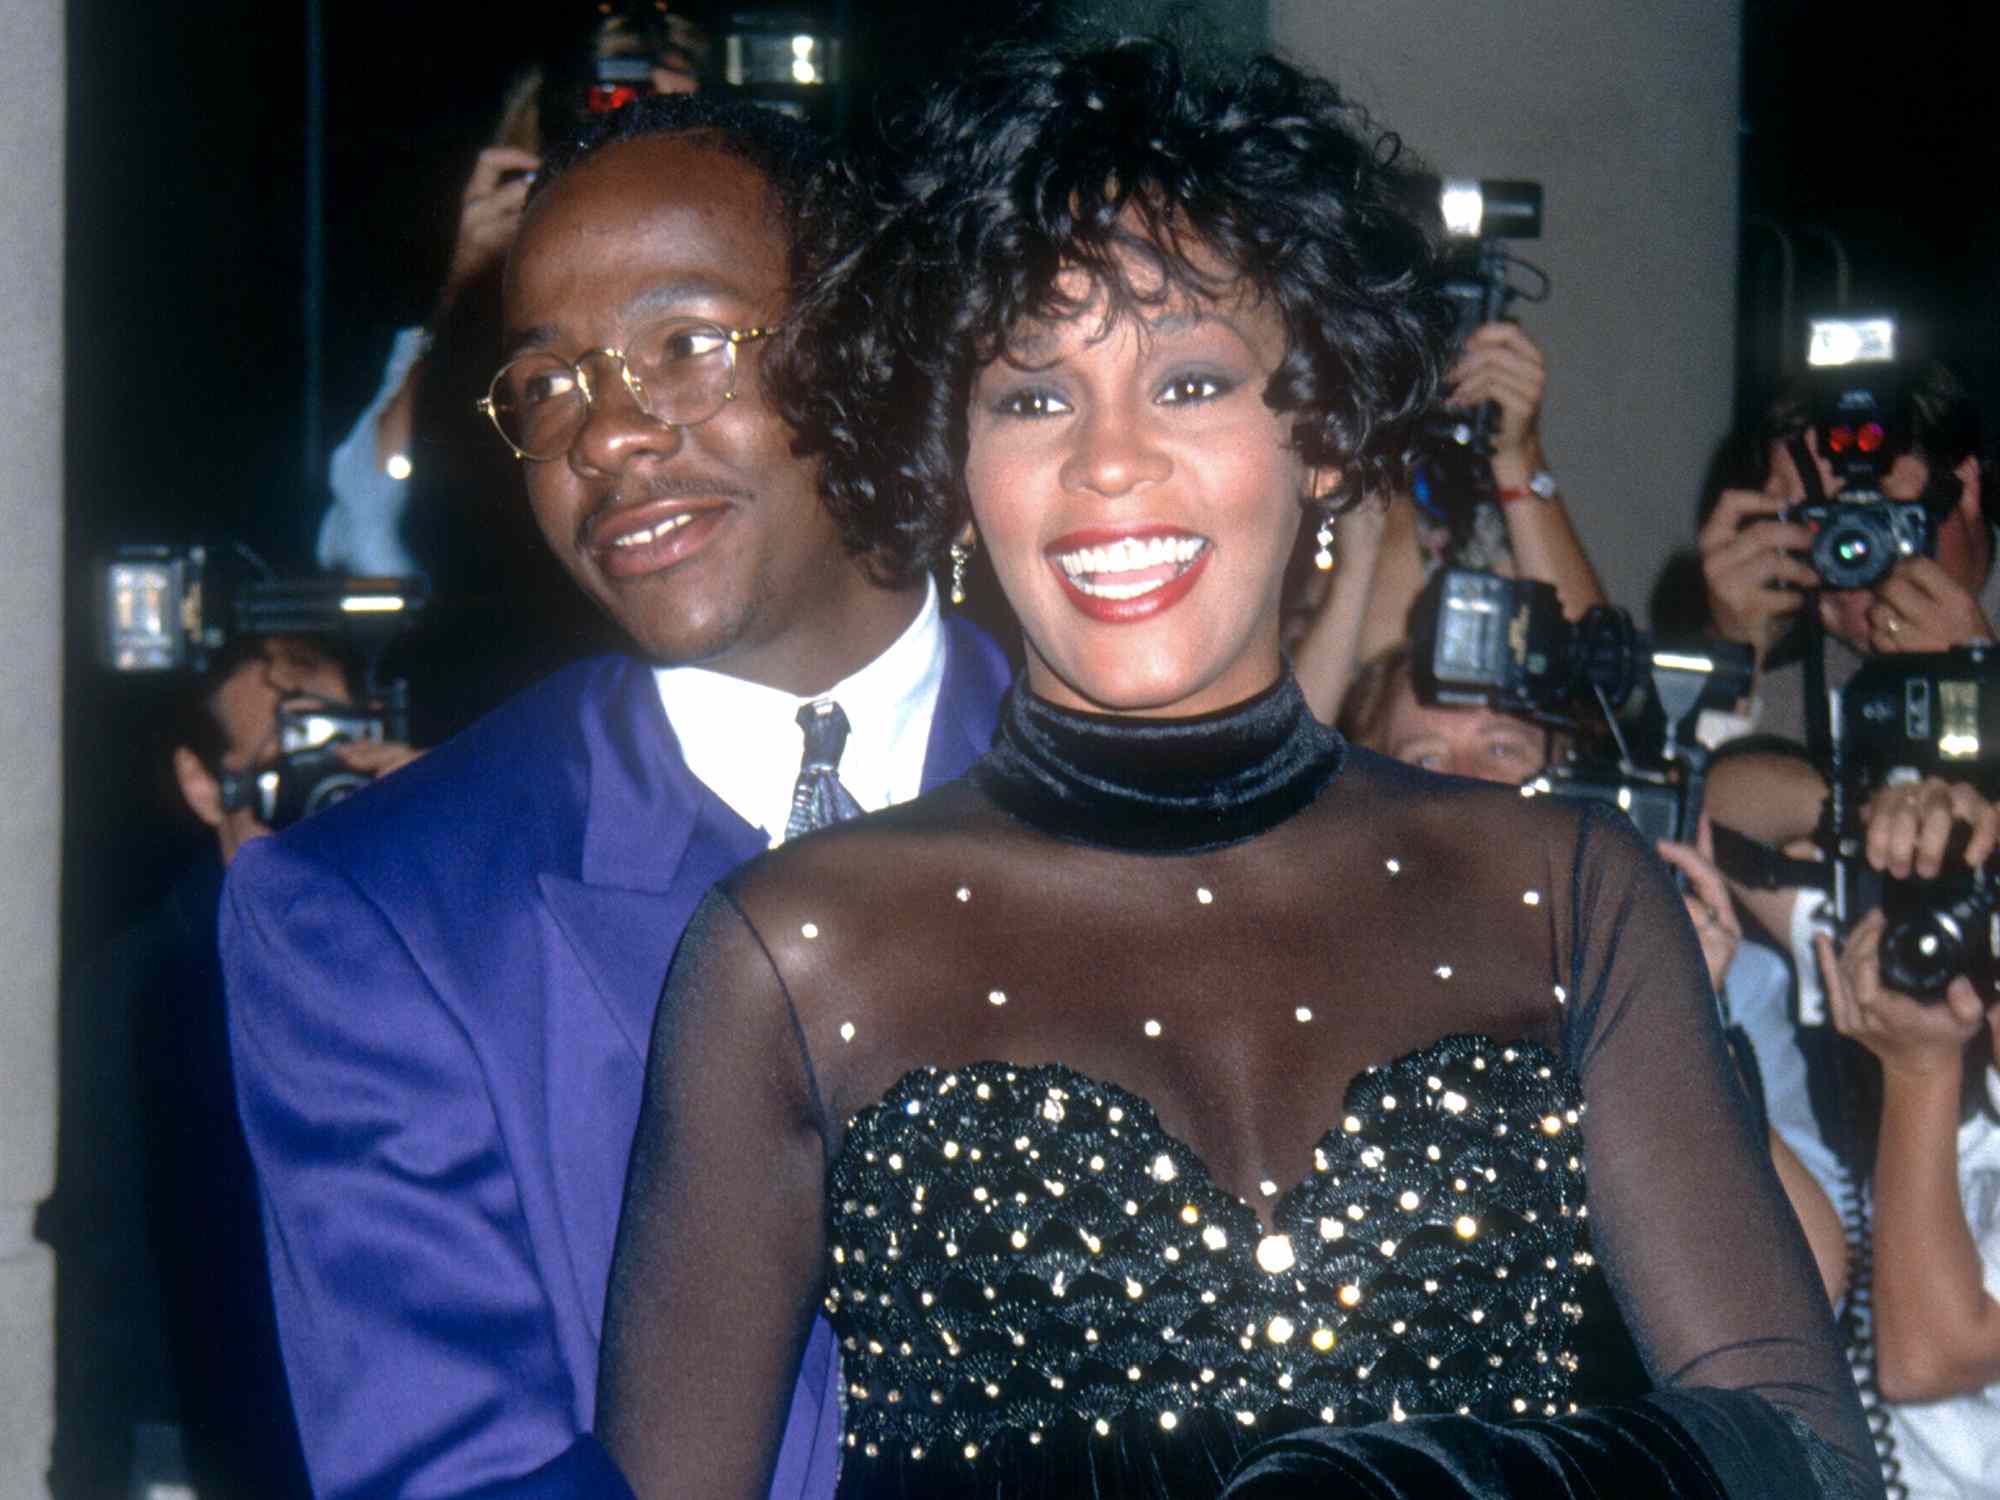 American singer Bobby Brown and wife, singer and actress Whitney Houston (1963-2012) attend the 1992 Carousel of Hope Ball to Benefit the Barbara Davis Center for Childhood Diabetes on October 2, 1992 at the Beverly Hilton Hotel in Beverly Hills, California